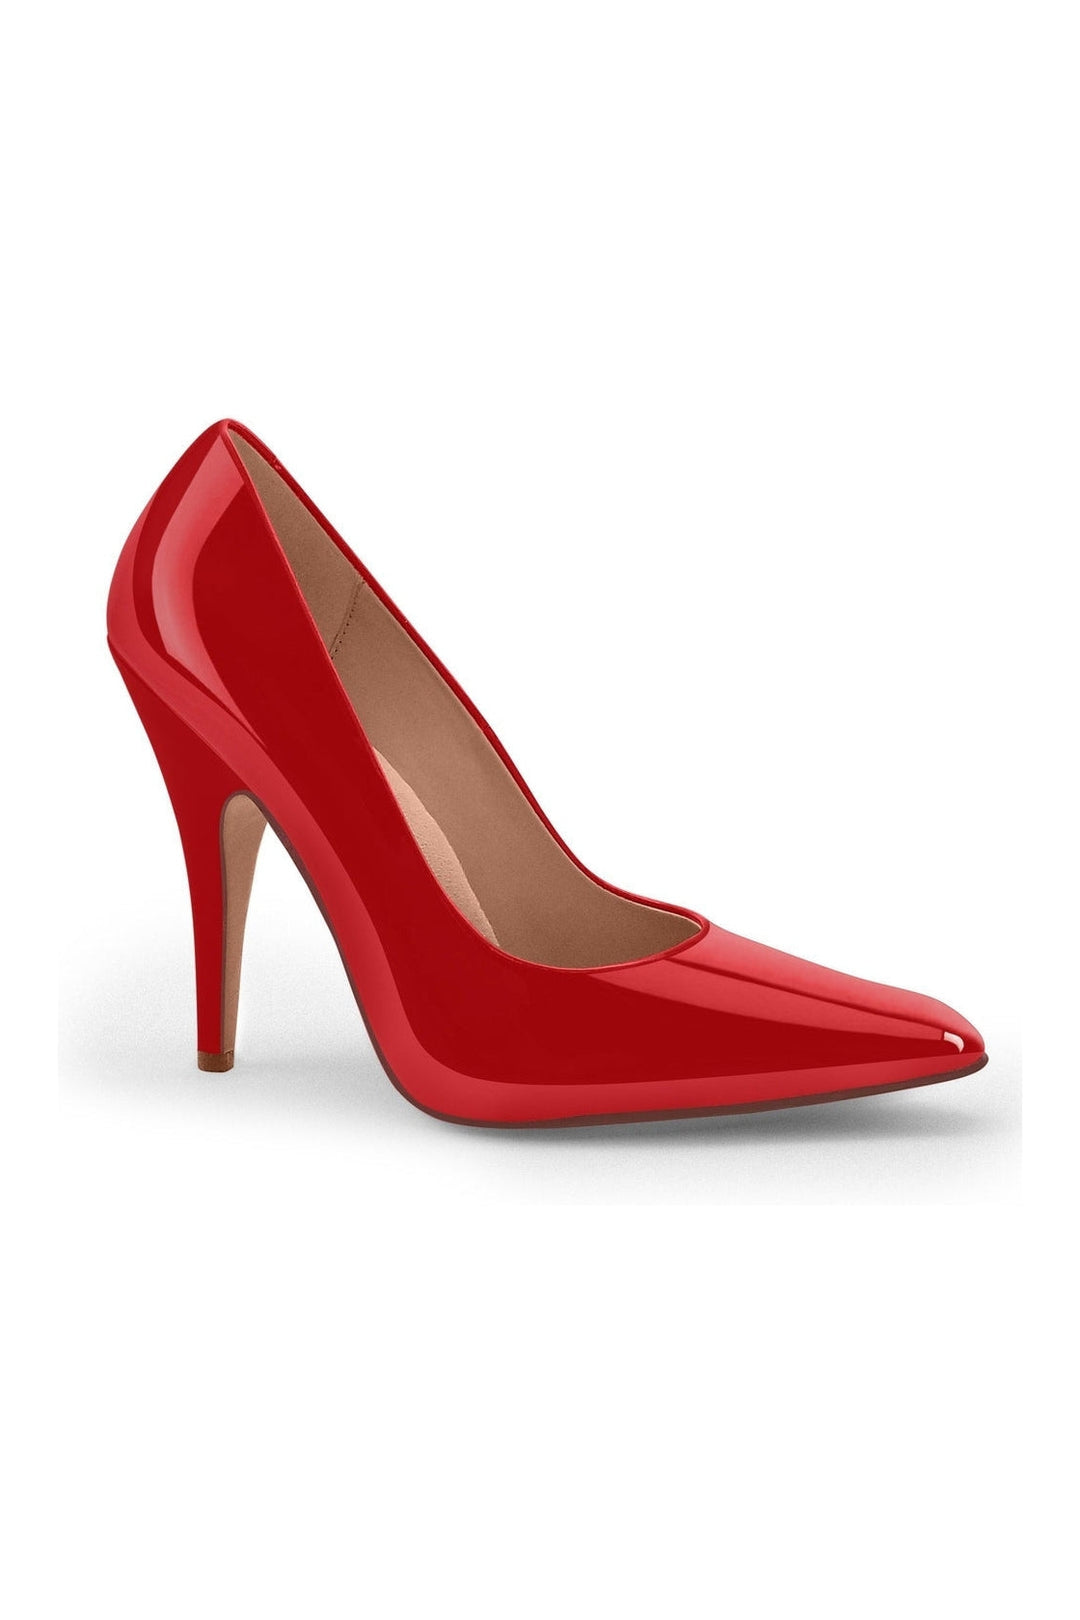 Classic Sexy Wide Width Pump-Pumps-Sexyshoes Signature-Red-SEXYSHOES.COM